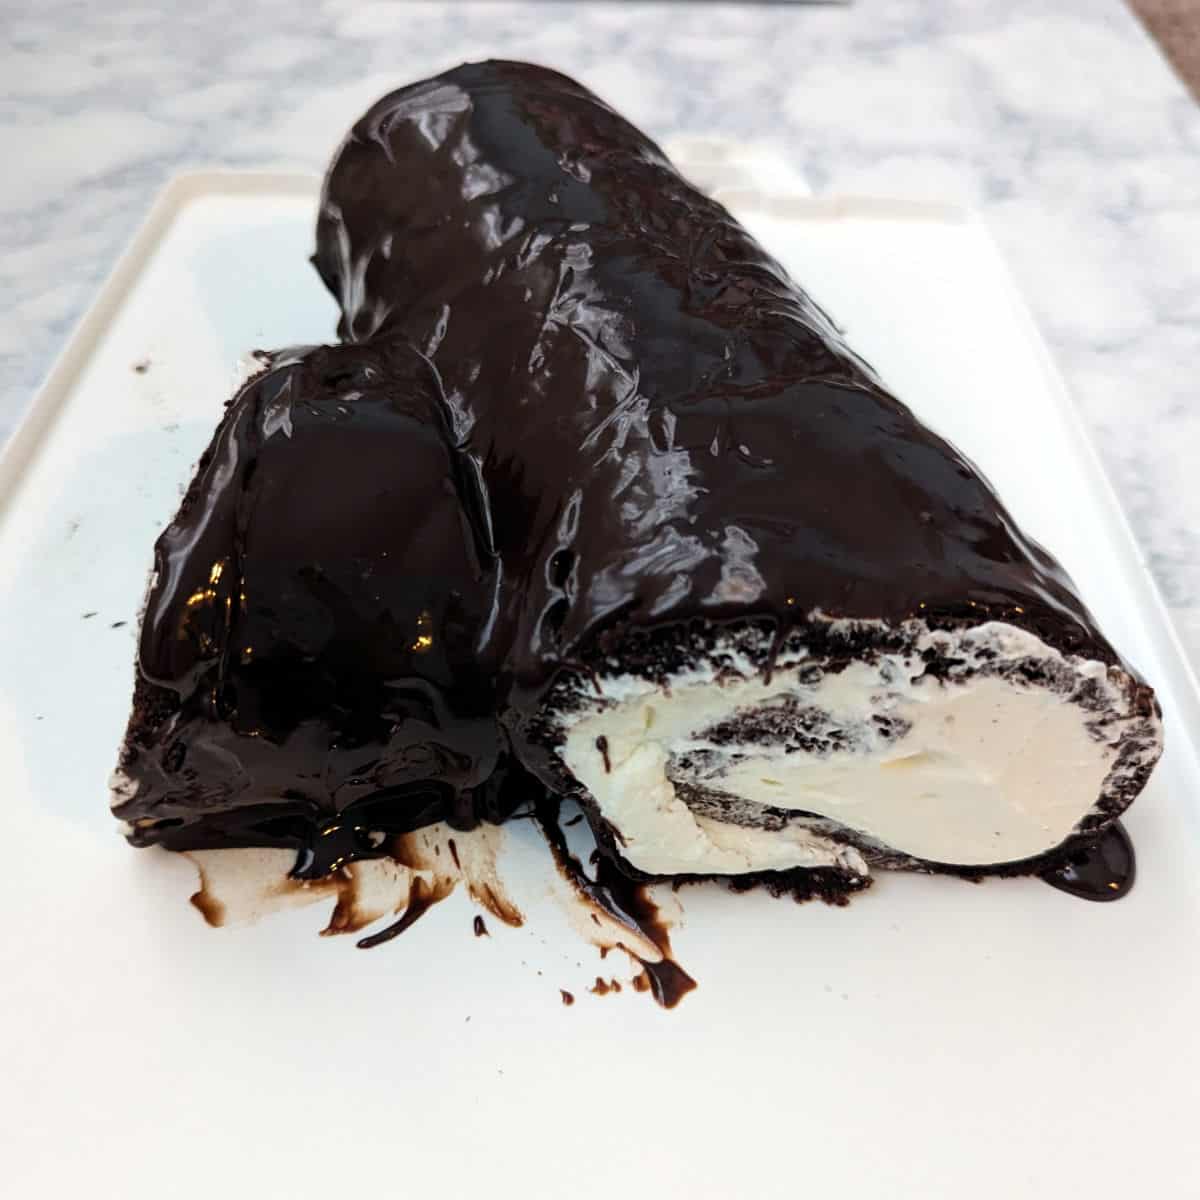 yule log, with the sides coated with ganache